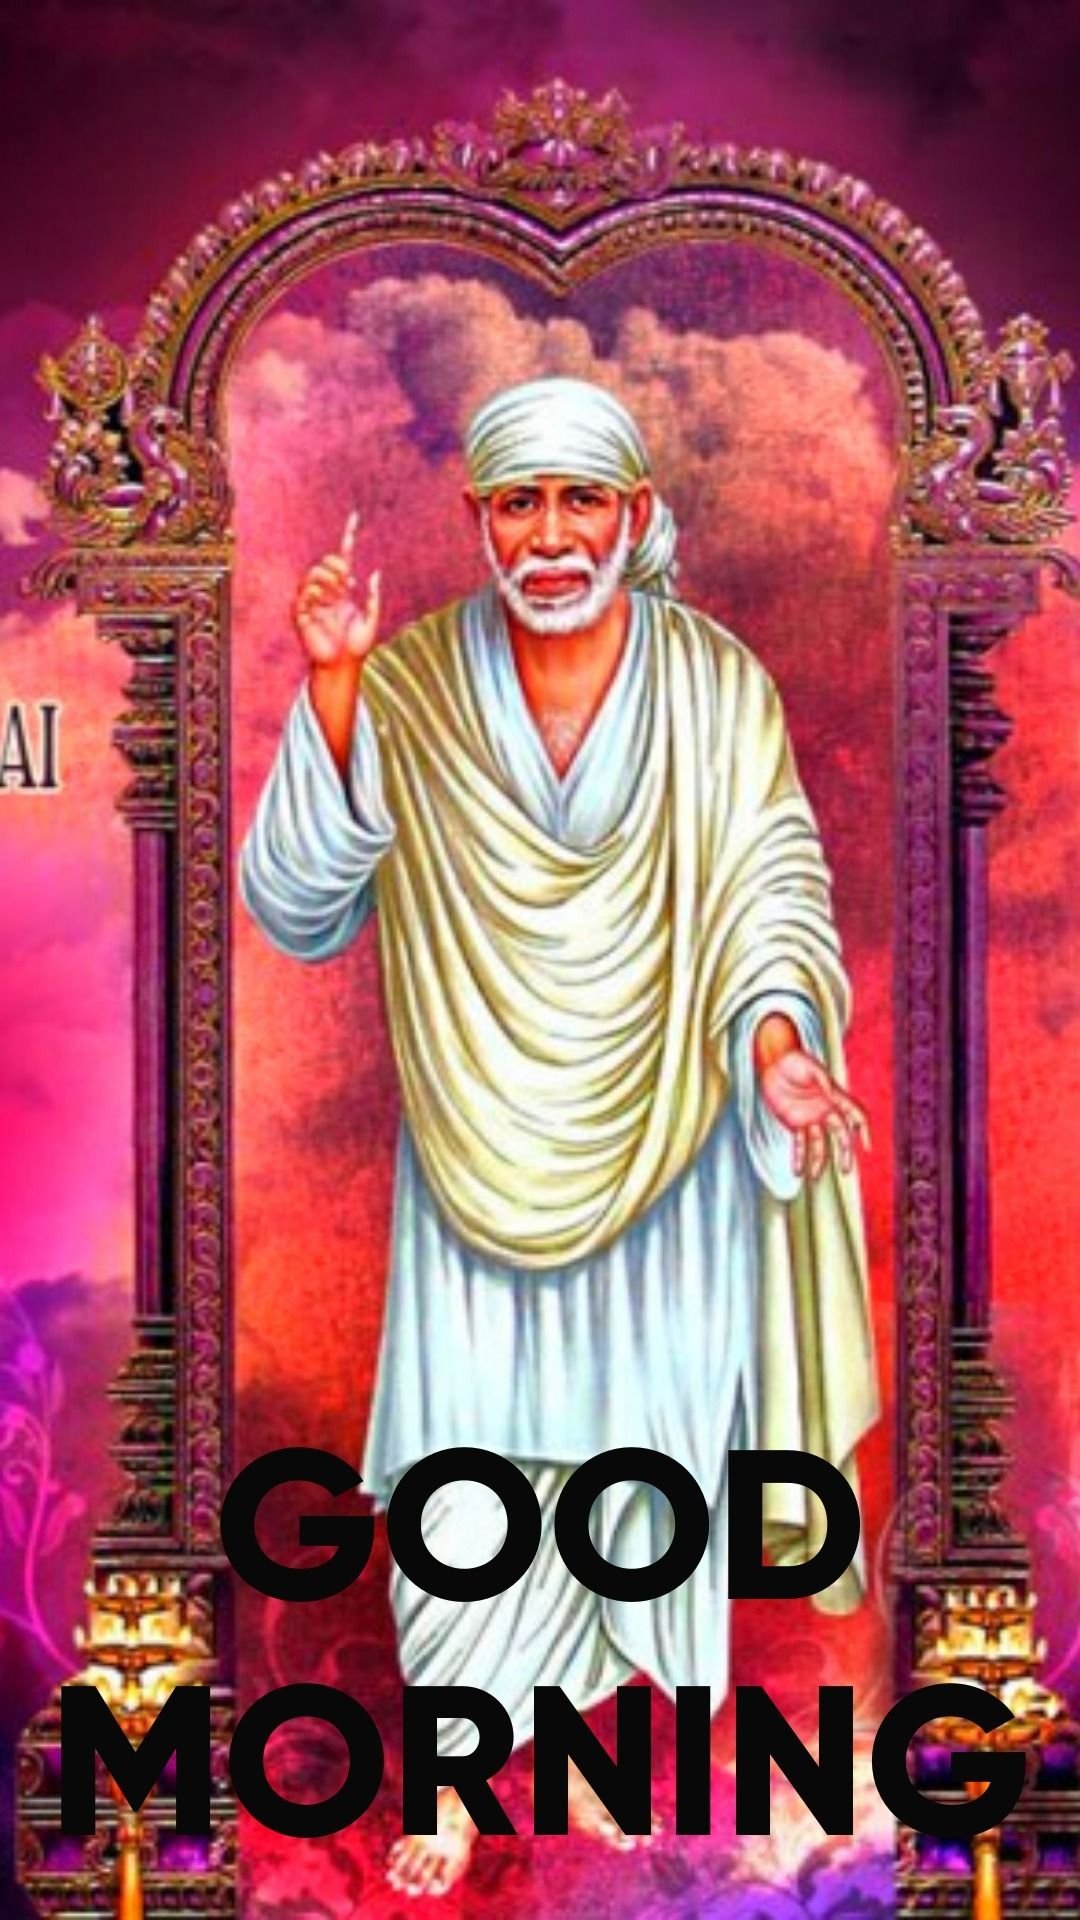 New Jersey Sai Baba Images